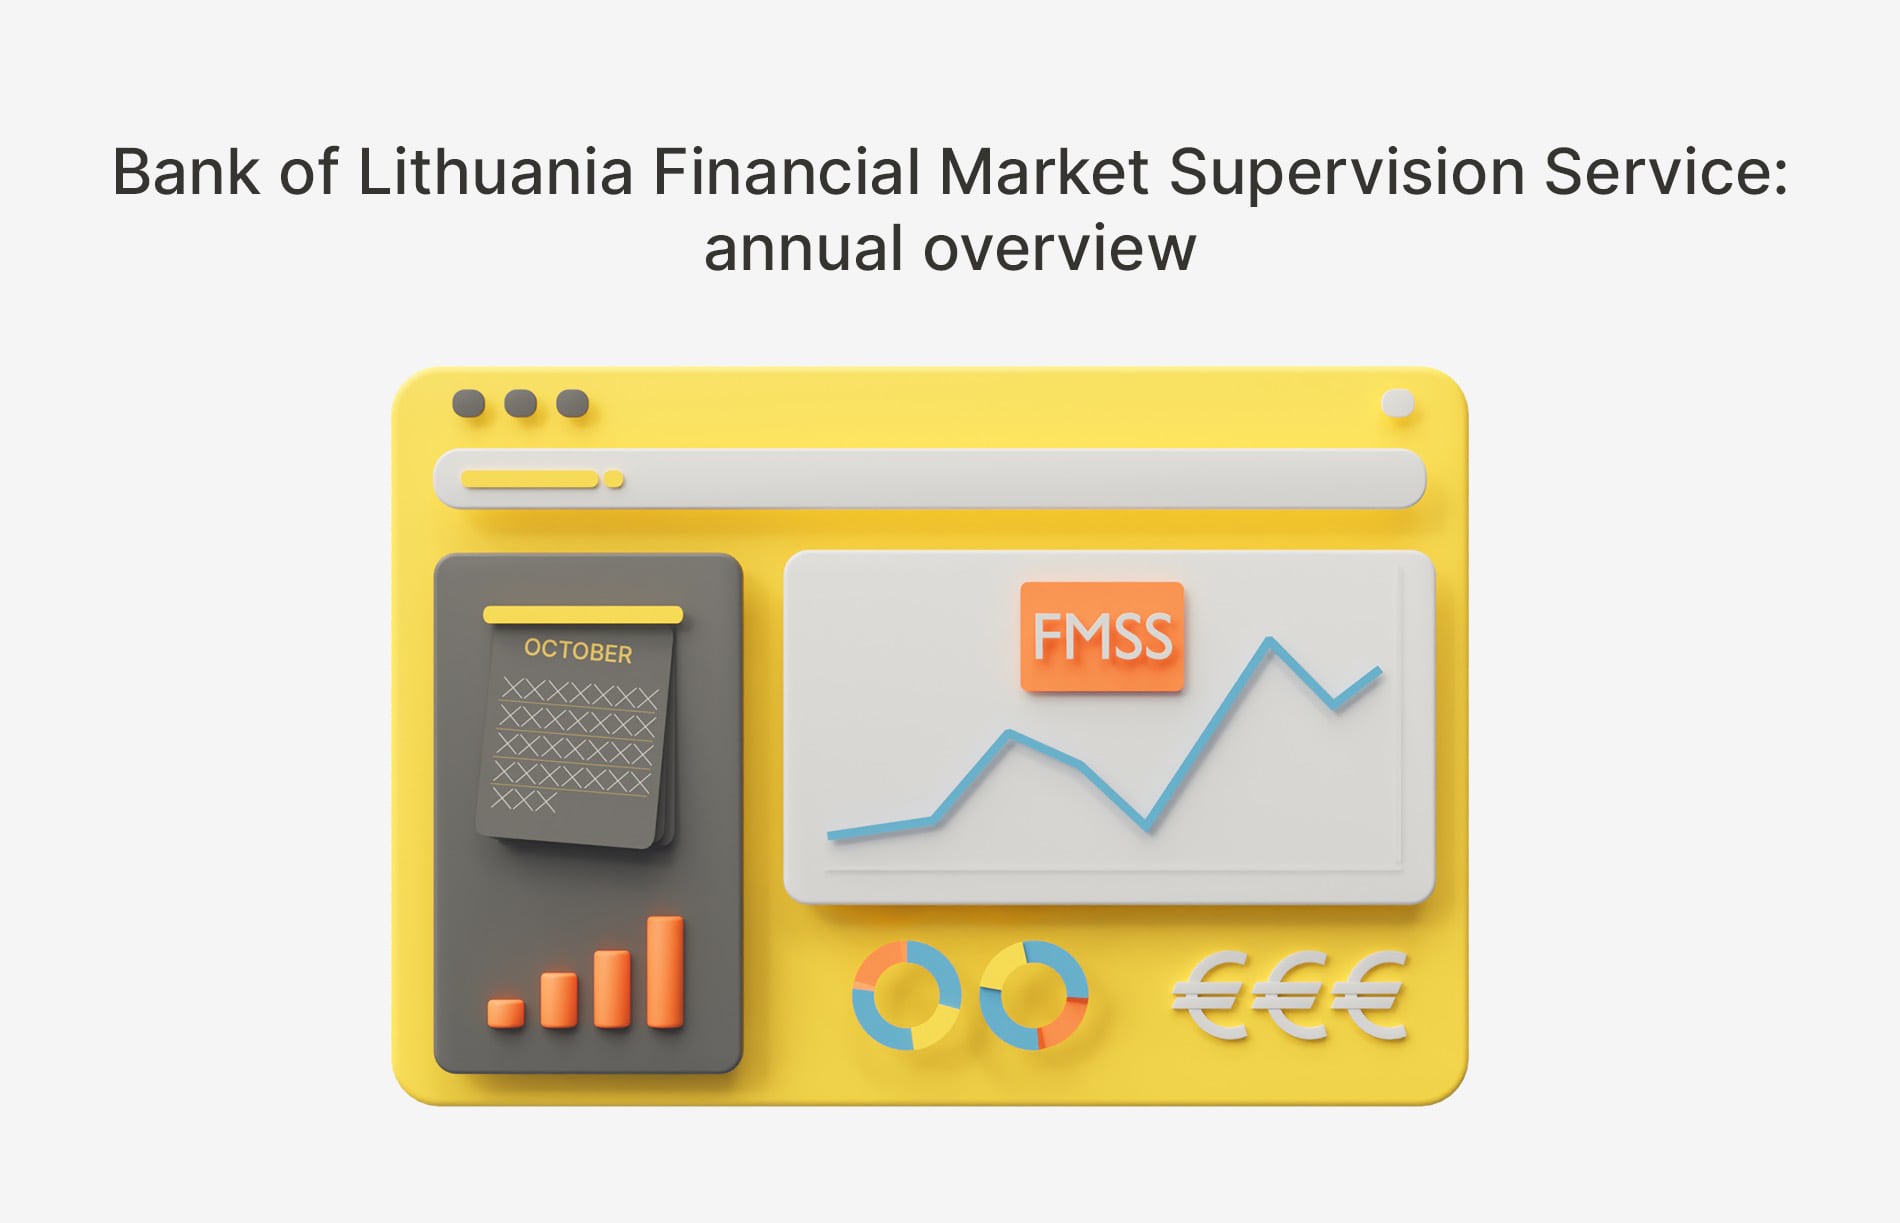 Bank of Lithuania Financial Market Supervision Service presented its annual overview